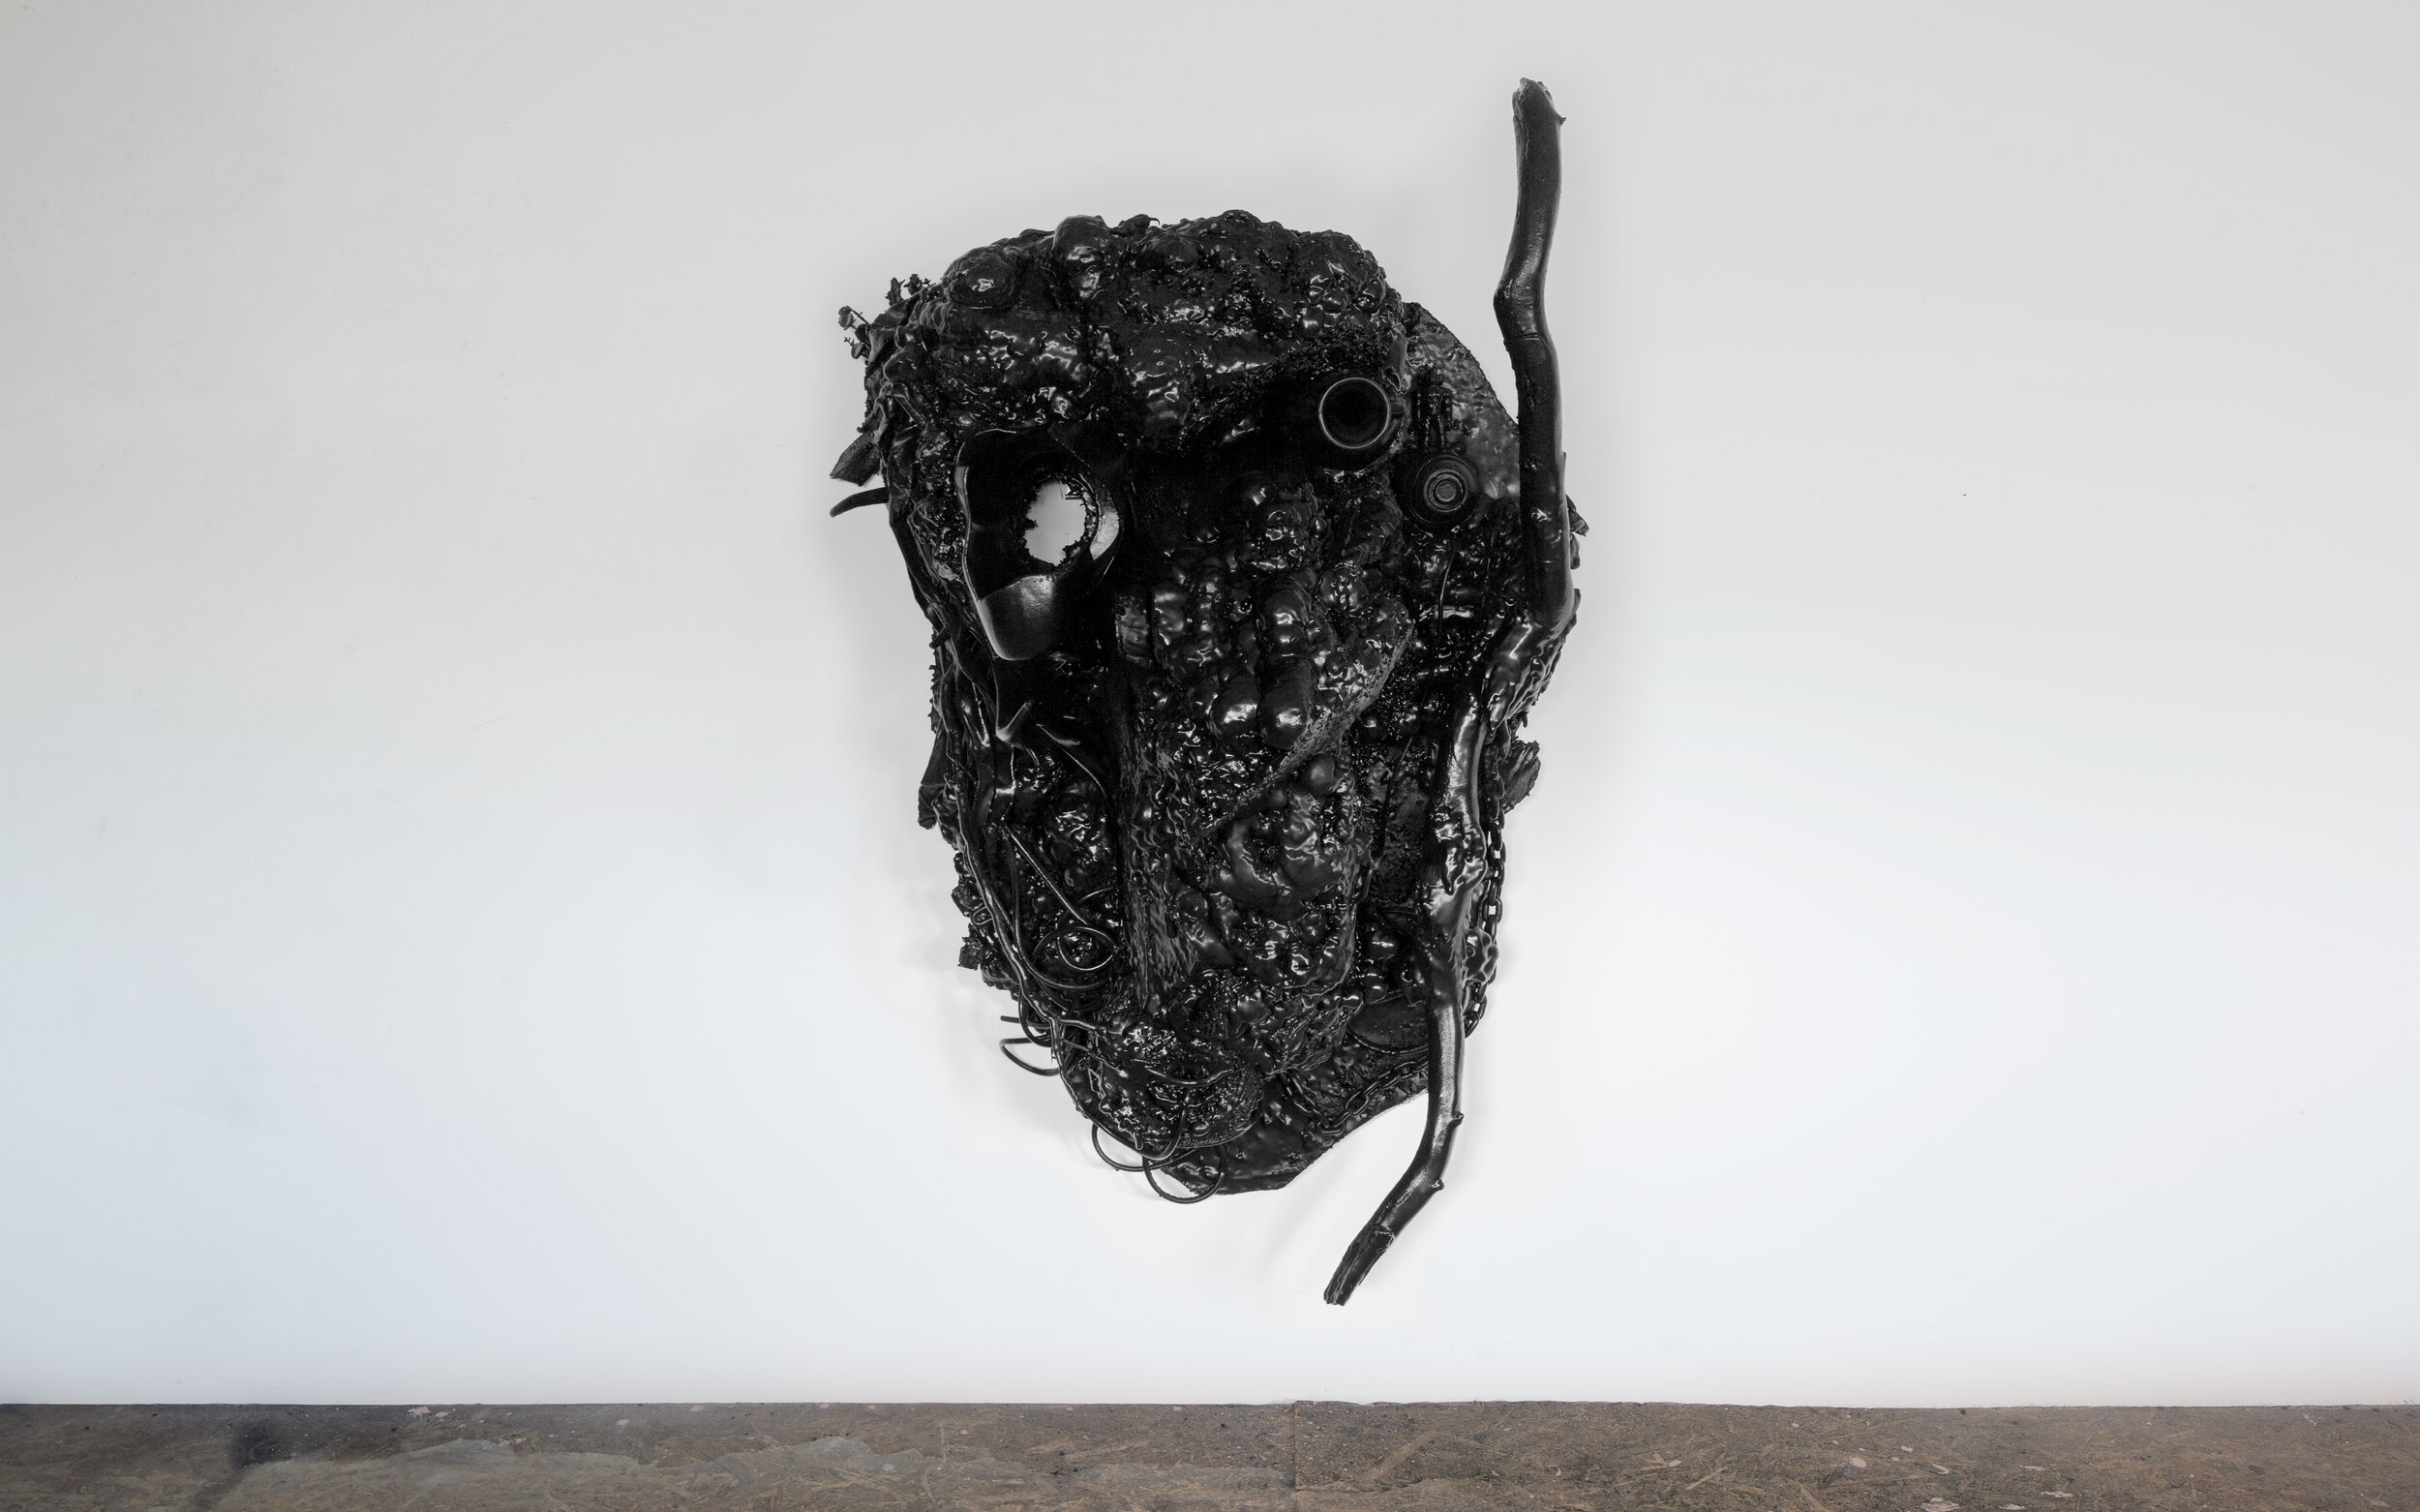  PERCEIVER, 180 x 133 x 77 cm, 2020, Polyurethane foam, plastic tube, tree branches, tree bark, electric cables, recycled plastics, roots, earth, steel wastes, construction nails, oil and acrylic paint, plastic bucket, gesso, metal boards, ceramic sc